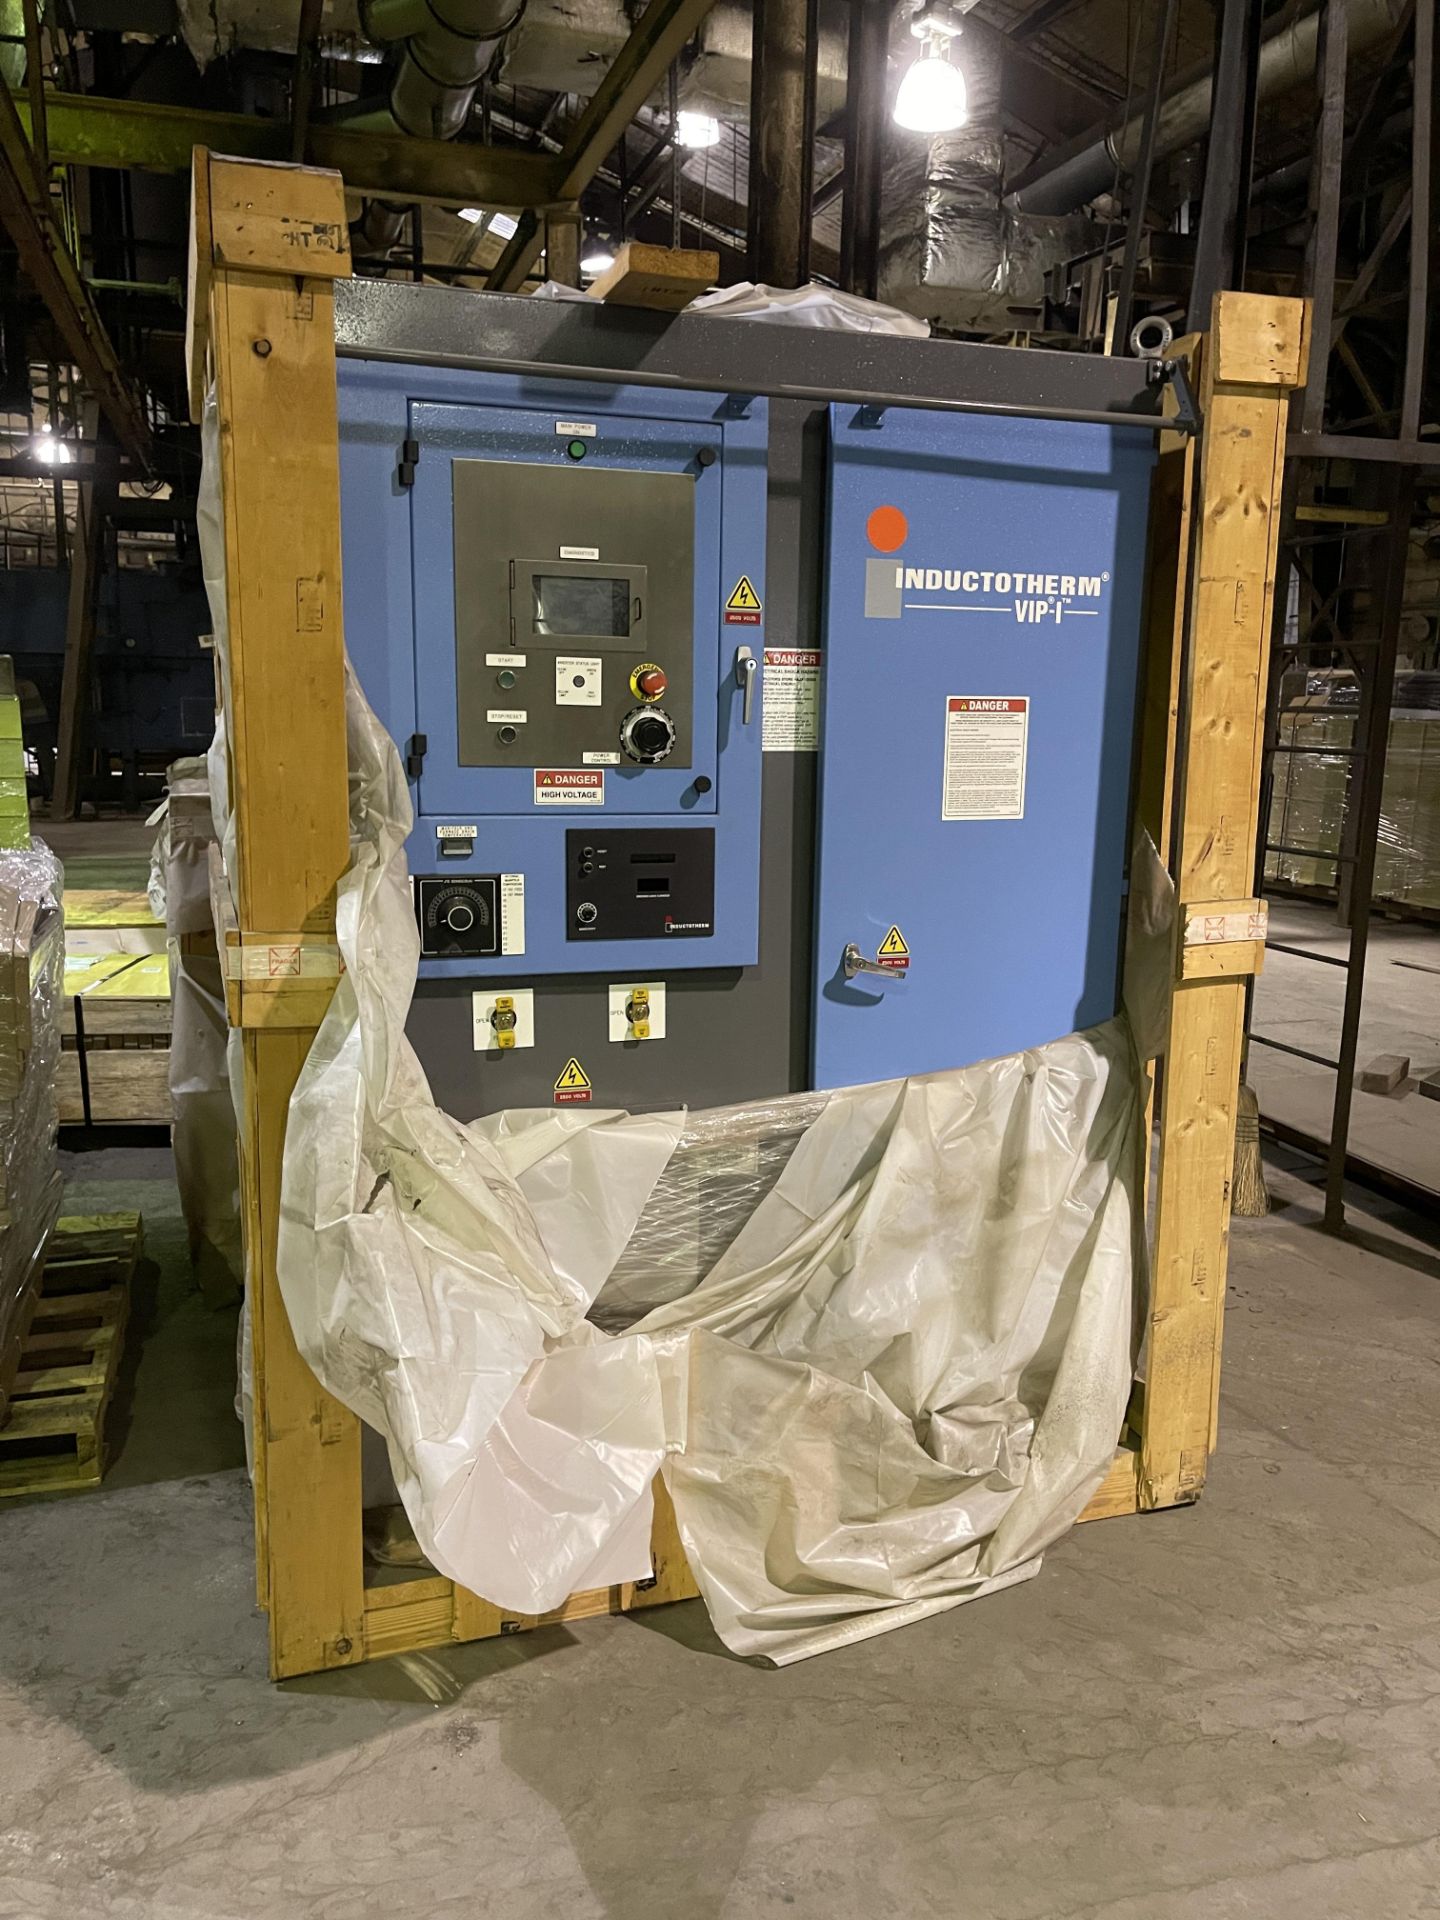 Inductotherm Melting System *New - Never Installed - Still in Crates*